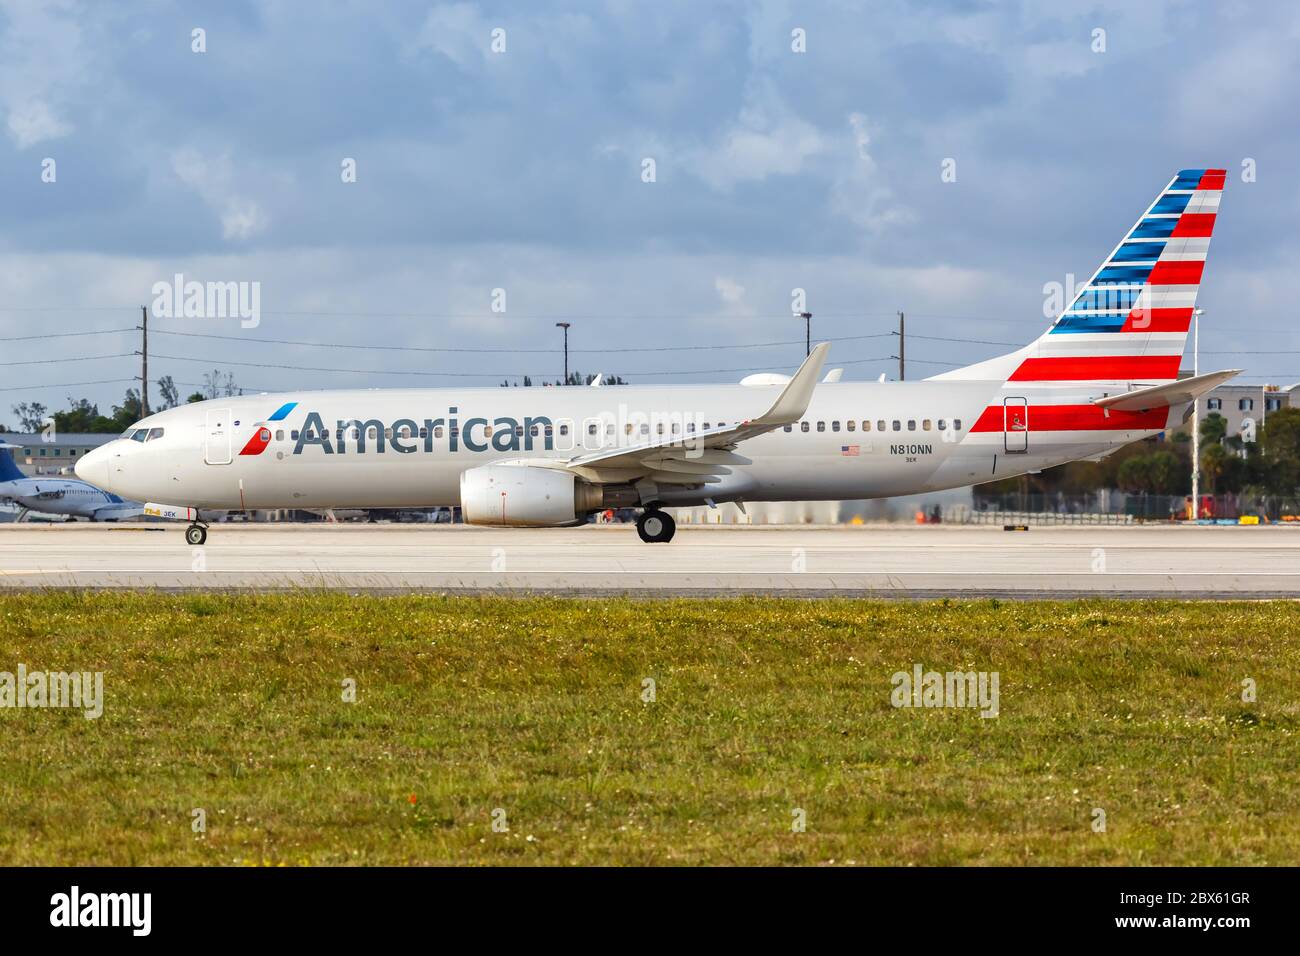 Miami, Florida April 6, 2019: American Airlines Boeing 737-800 airplane at Miami airport MIA in Florida. Boeing is an American aircraft manufacturer h Stock Photo